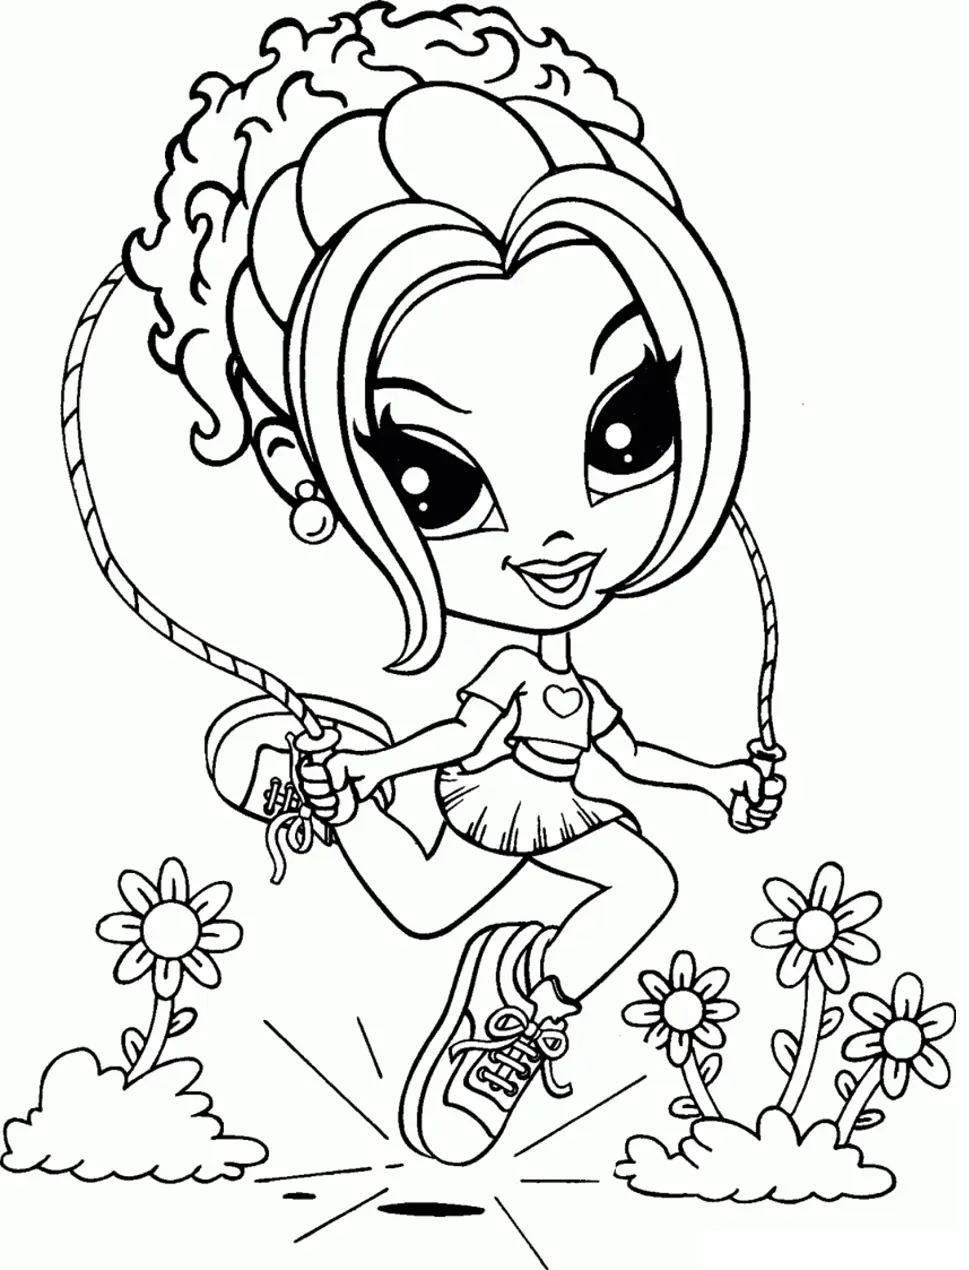 Y2K Coloring Pages